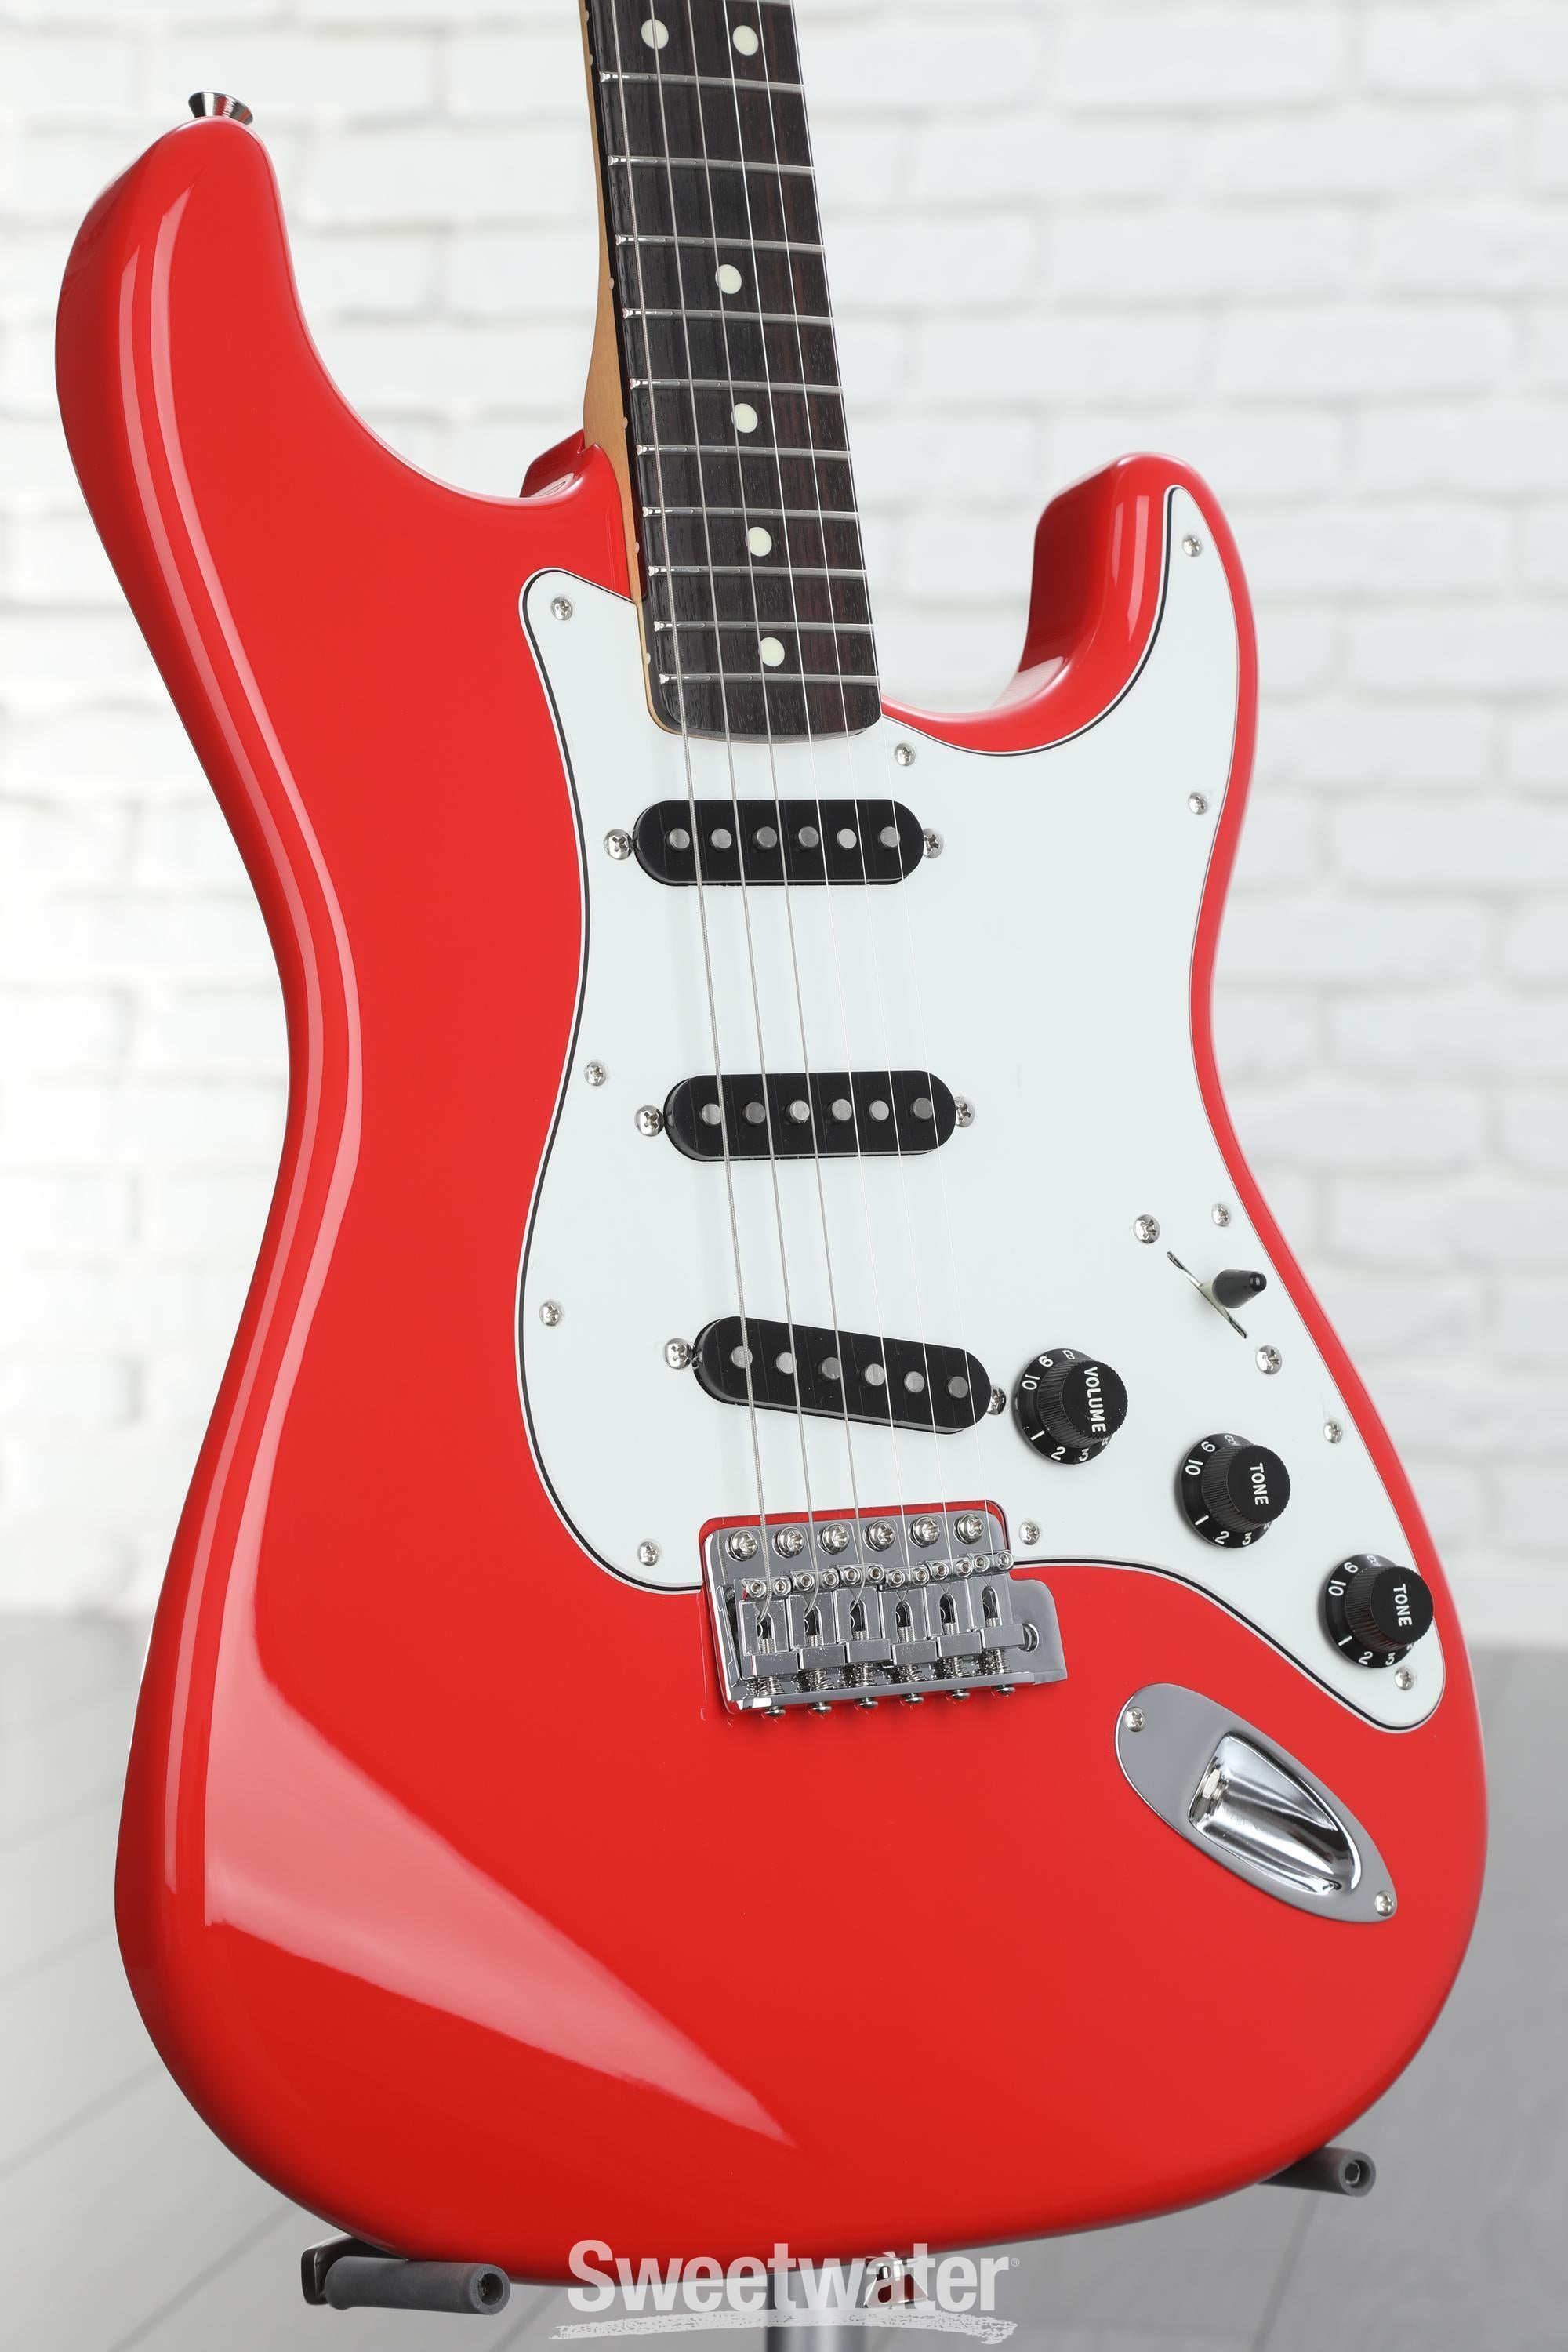 in　Japan　Sweetwater　Morocco　Made　International　Color　Stratocaster　Red　Fender　Limited